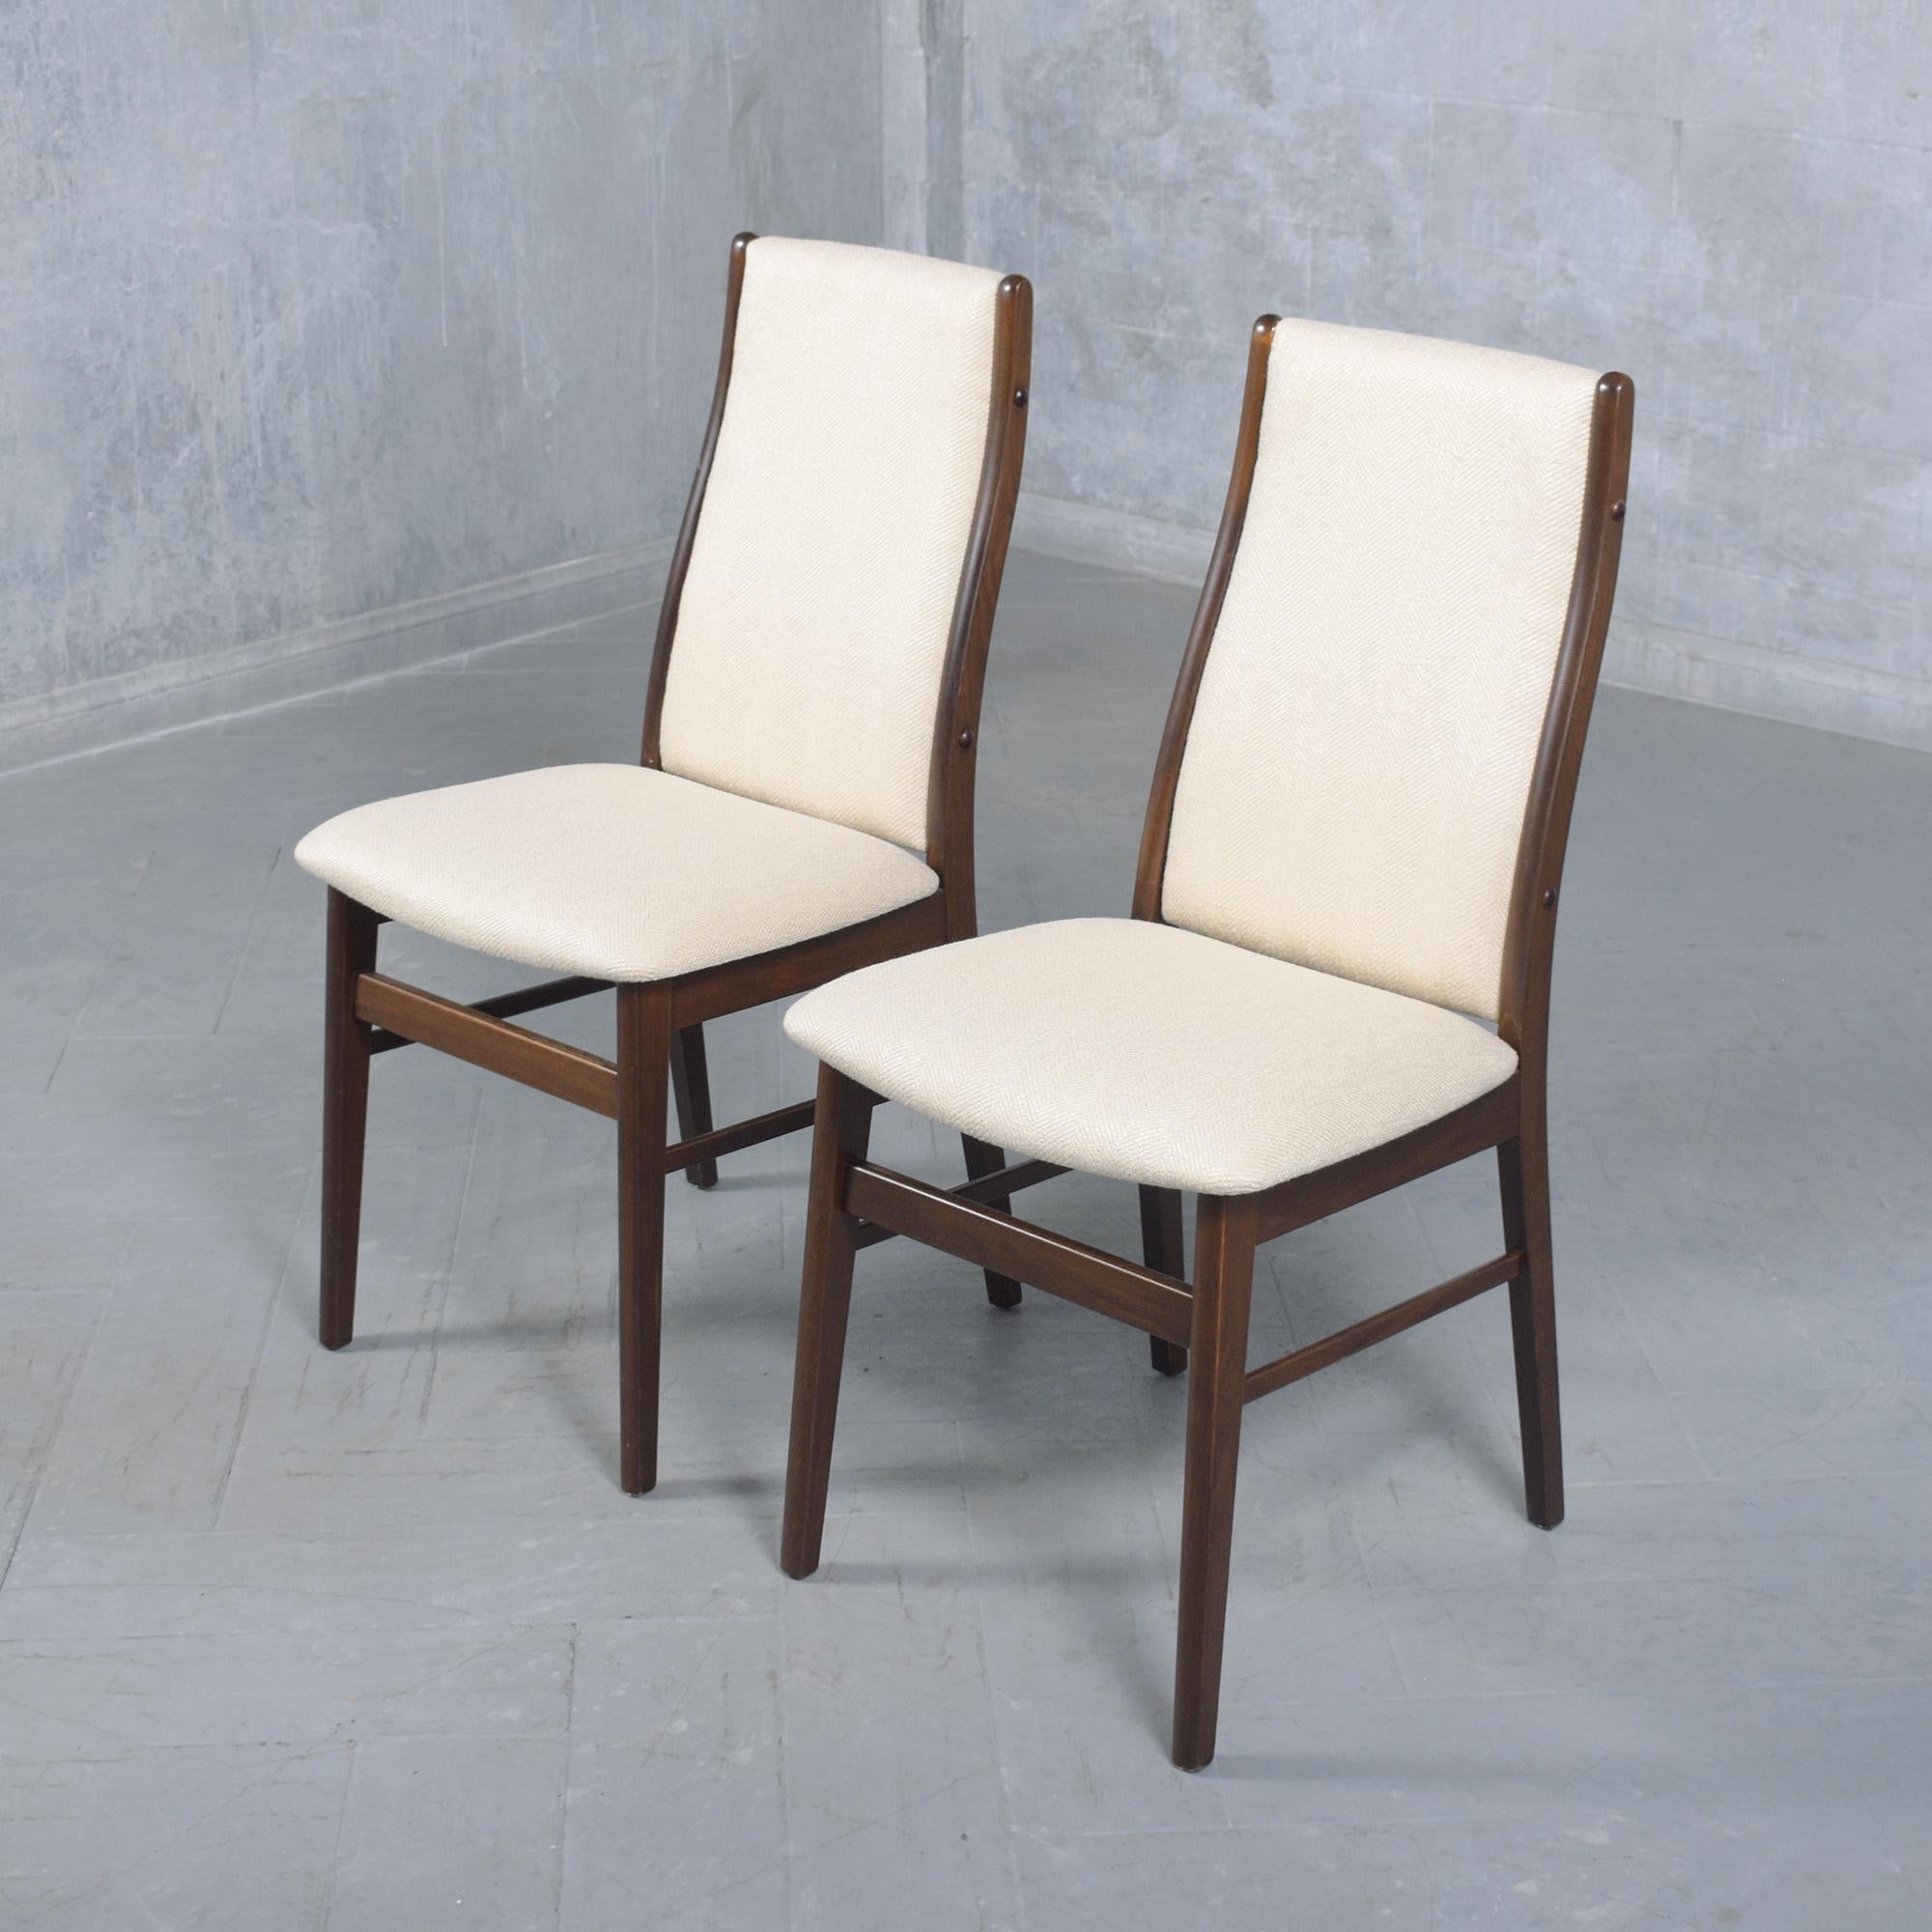 Fabric Exquisite Danish Teak Dining Chairs, Restored and Refined For Sale